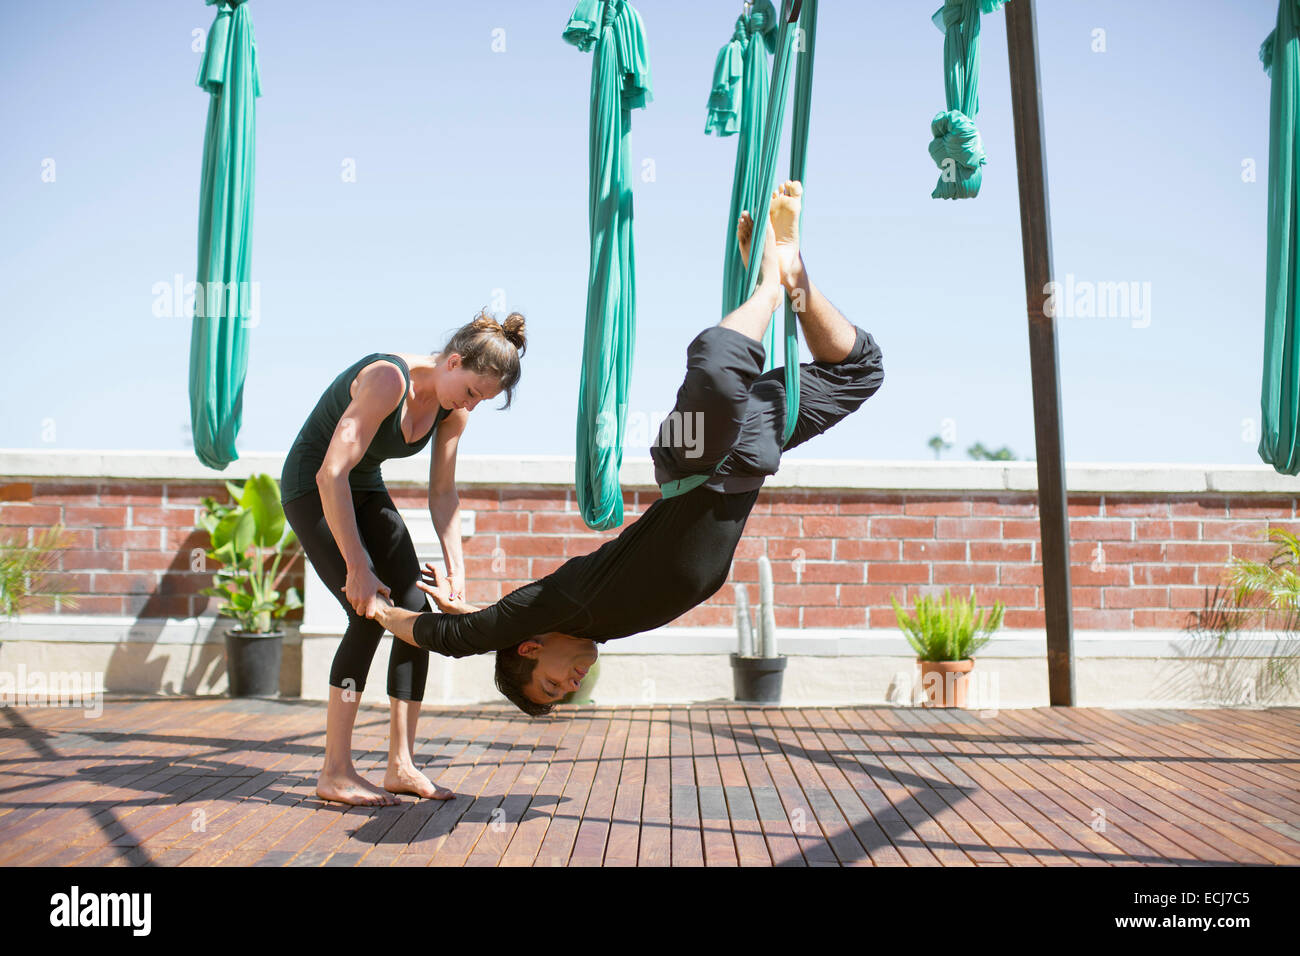 A beautiful girls and a young man perform aerial yoga. Stock Photo